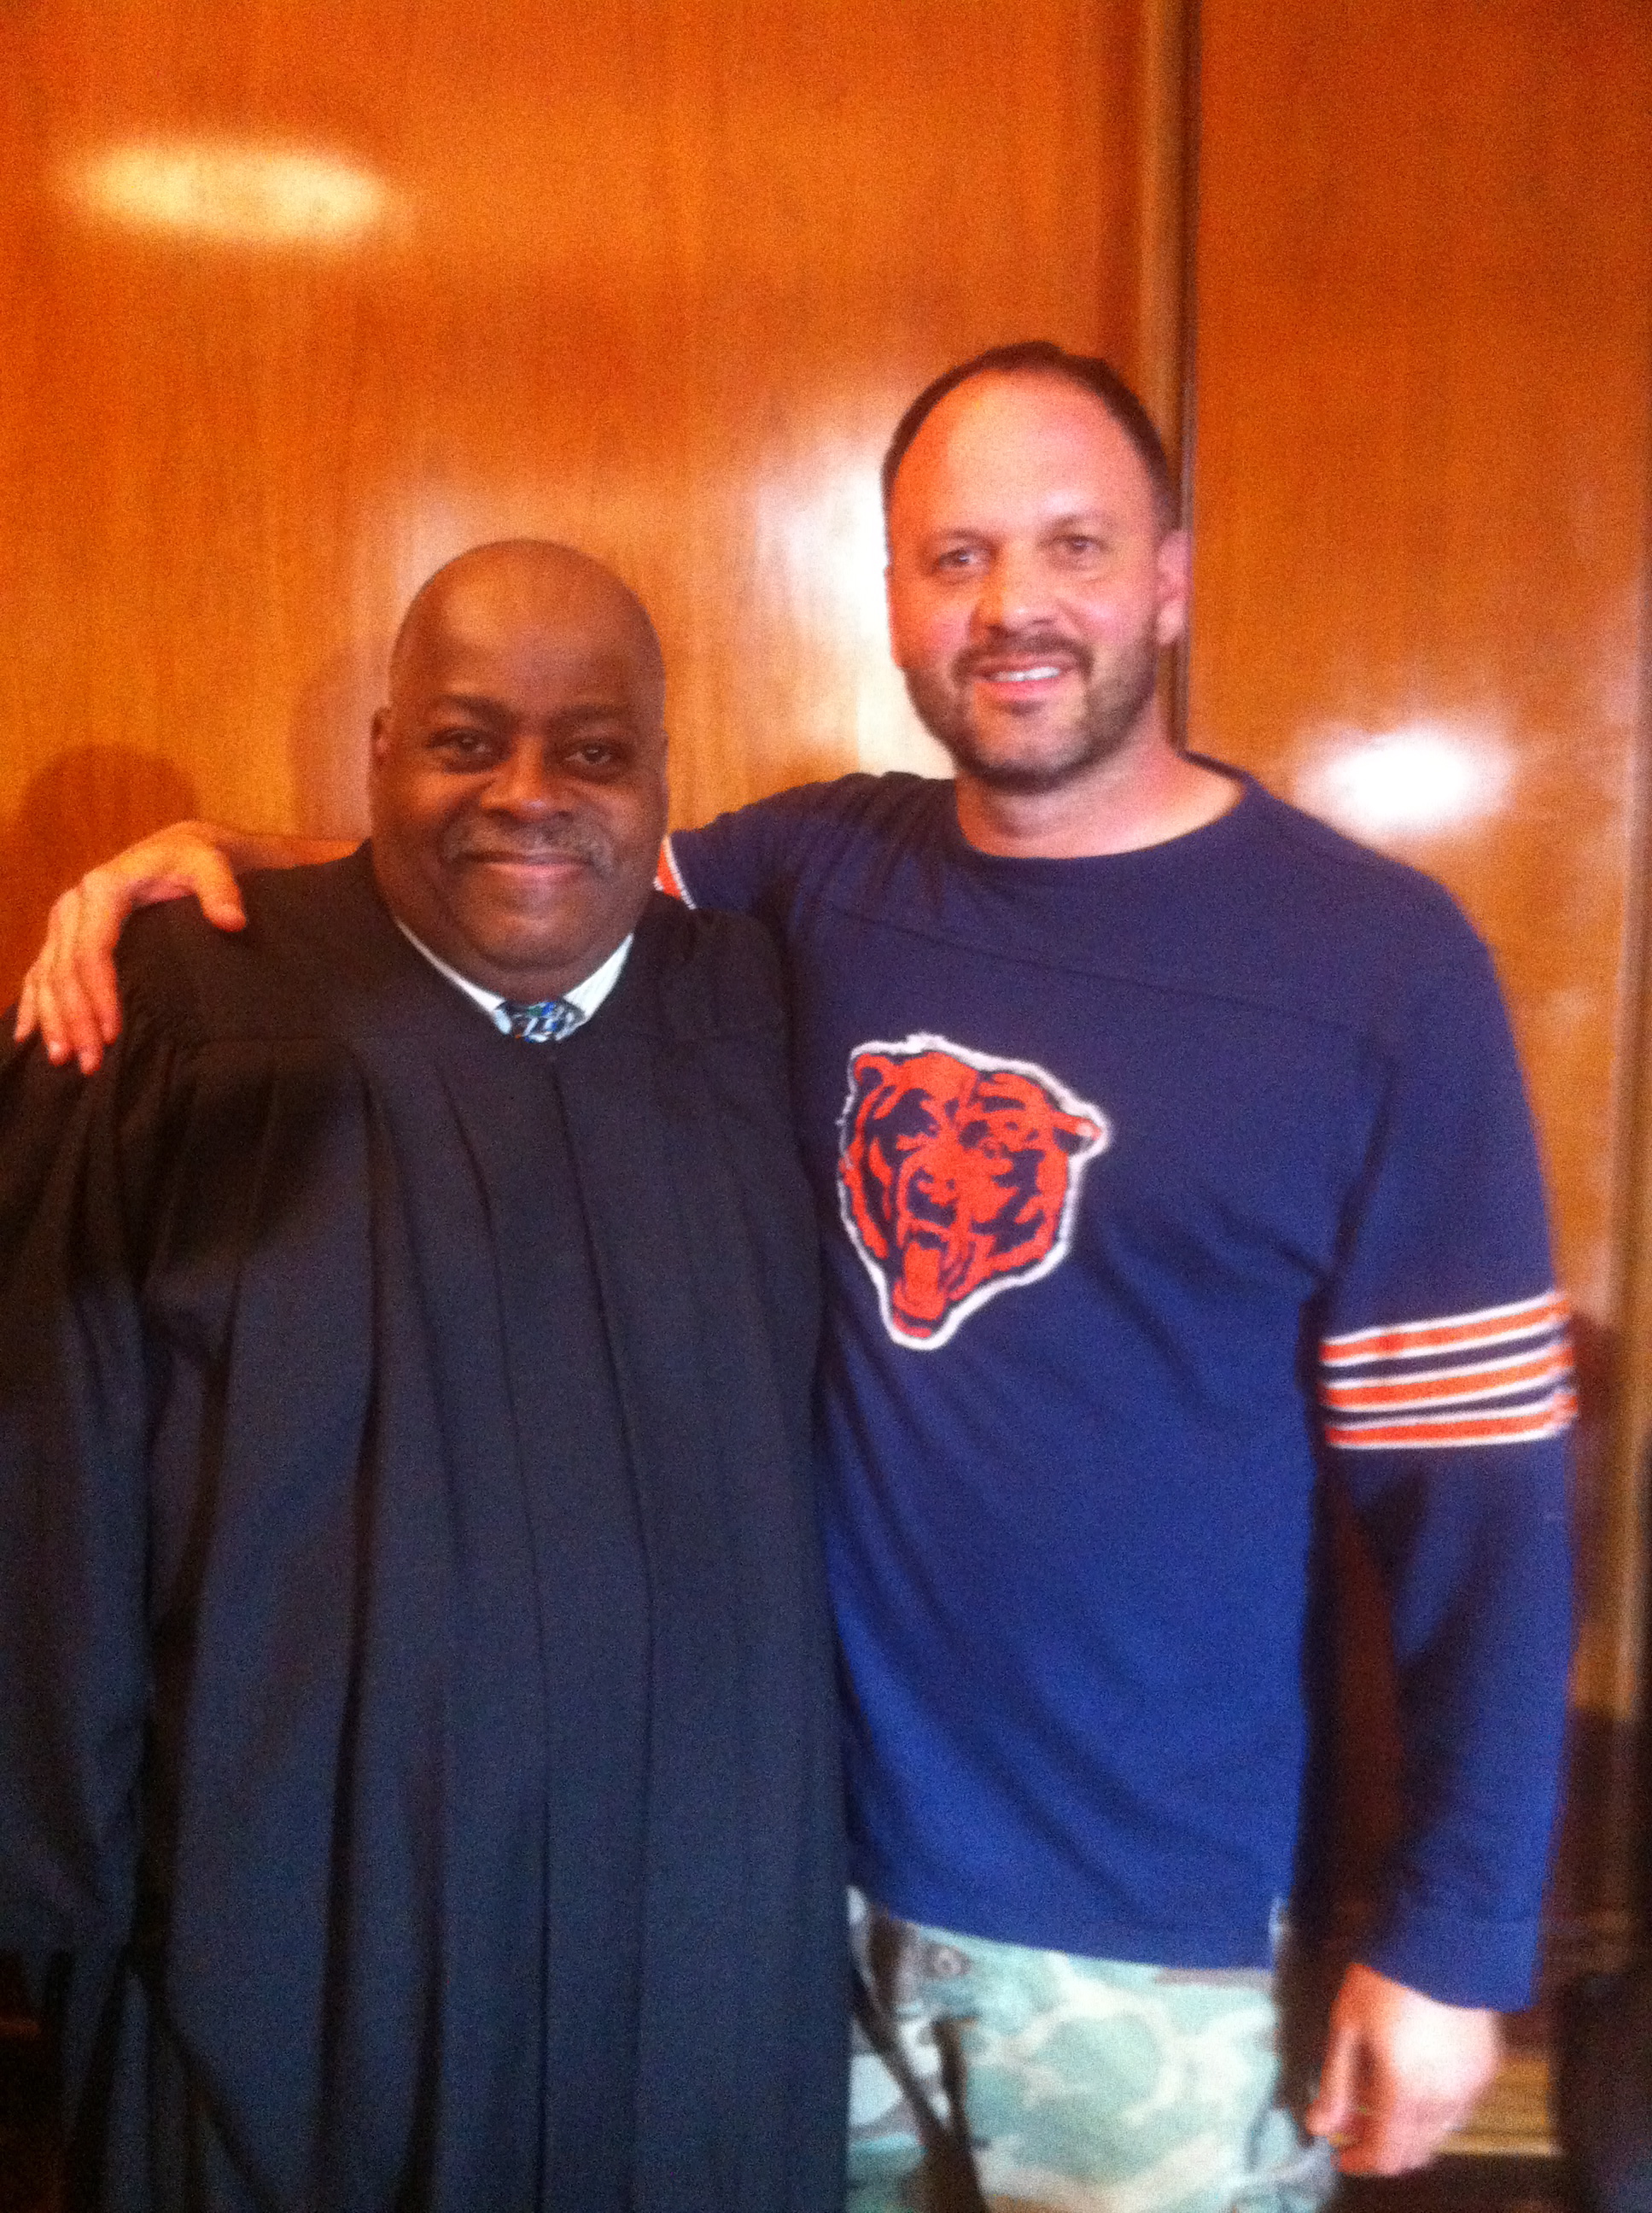 Reginald VelJohnson playing Judge Morris in courtroom scene of 'Strike One' with director and Chicago Bears fan Me!